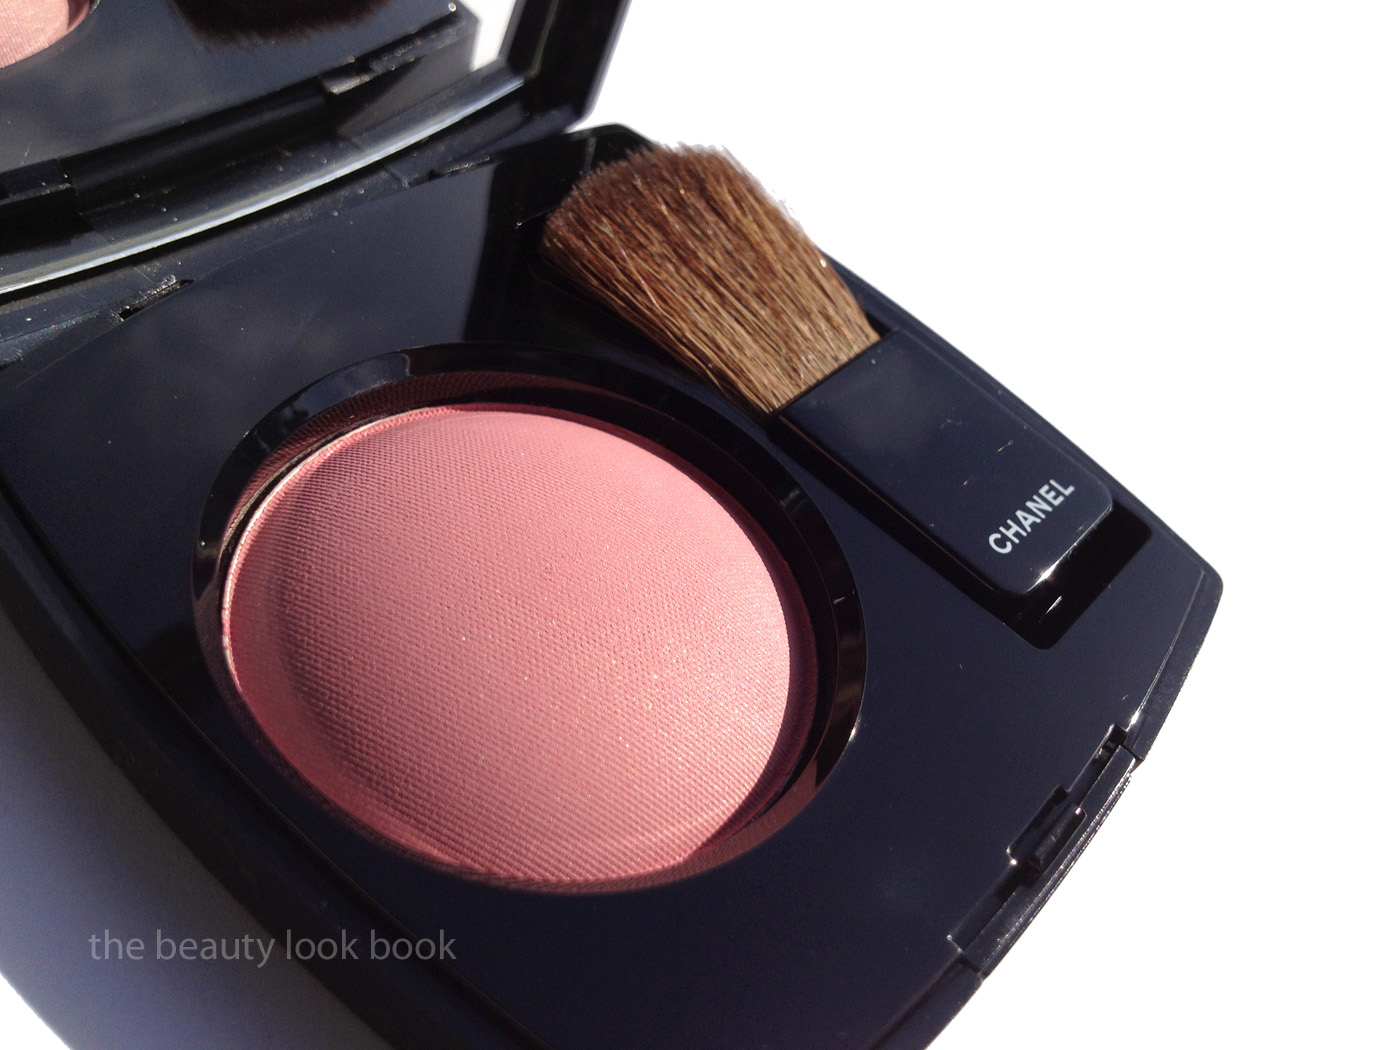 Chanel Rose Initiale Powder Blush #72 - Fall 2012 - The Beauty